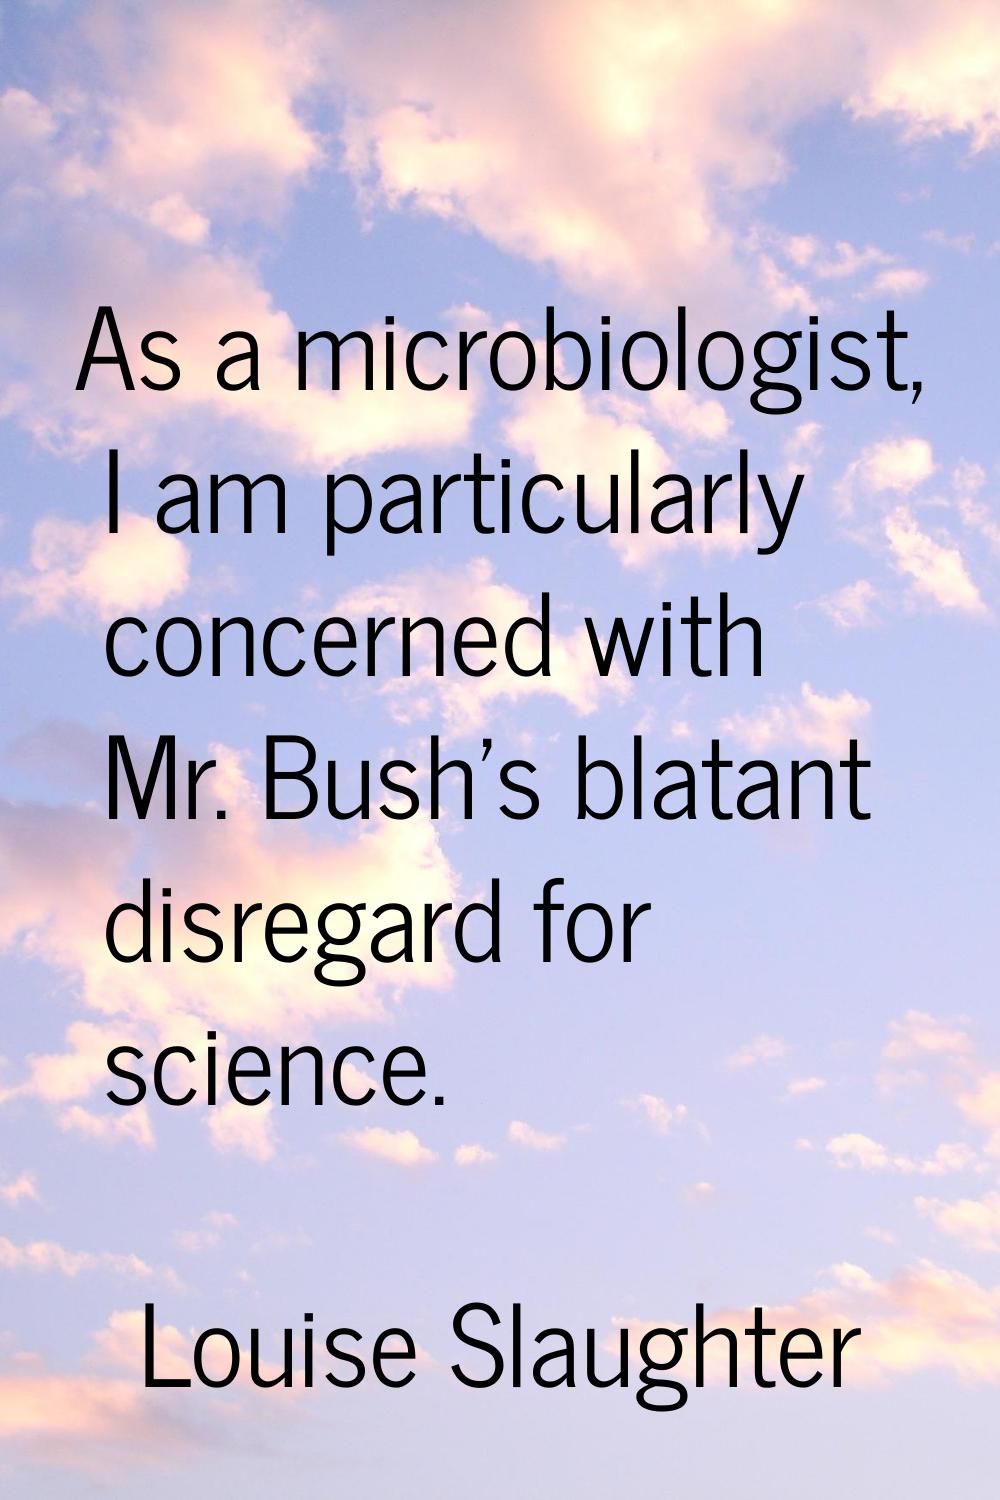 As a microbiologist, I am particularly concerned with Mr. Bush's blatant disregard for science.